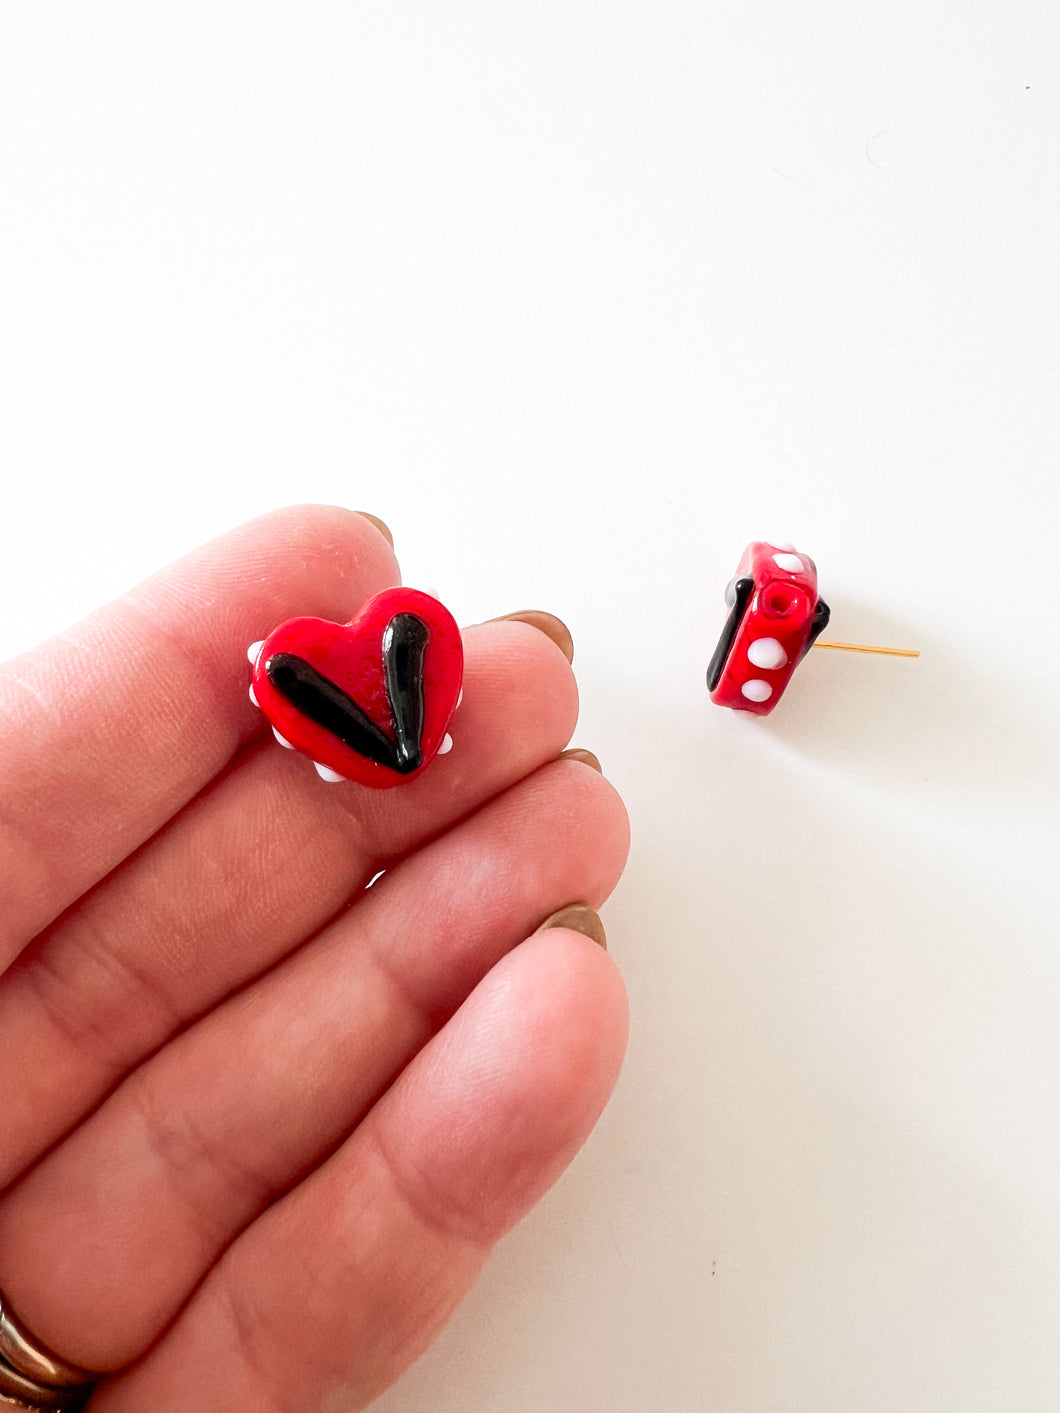 Red and Black Heart Post Earrings